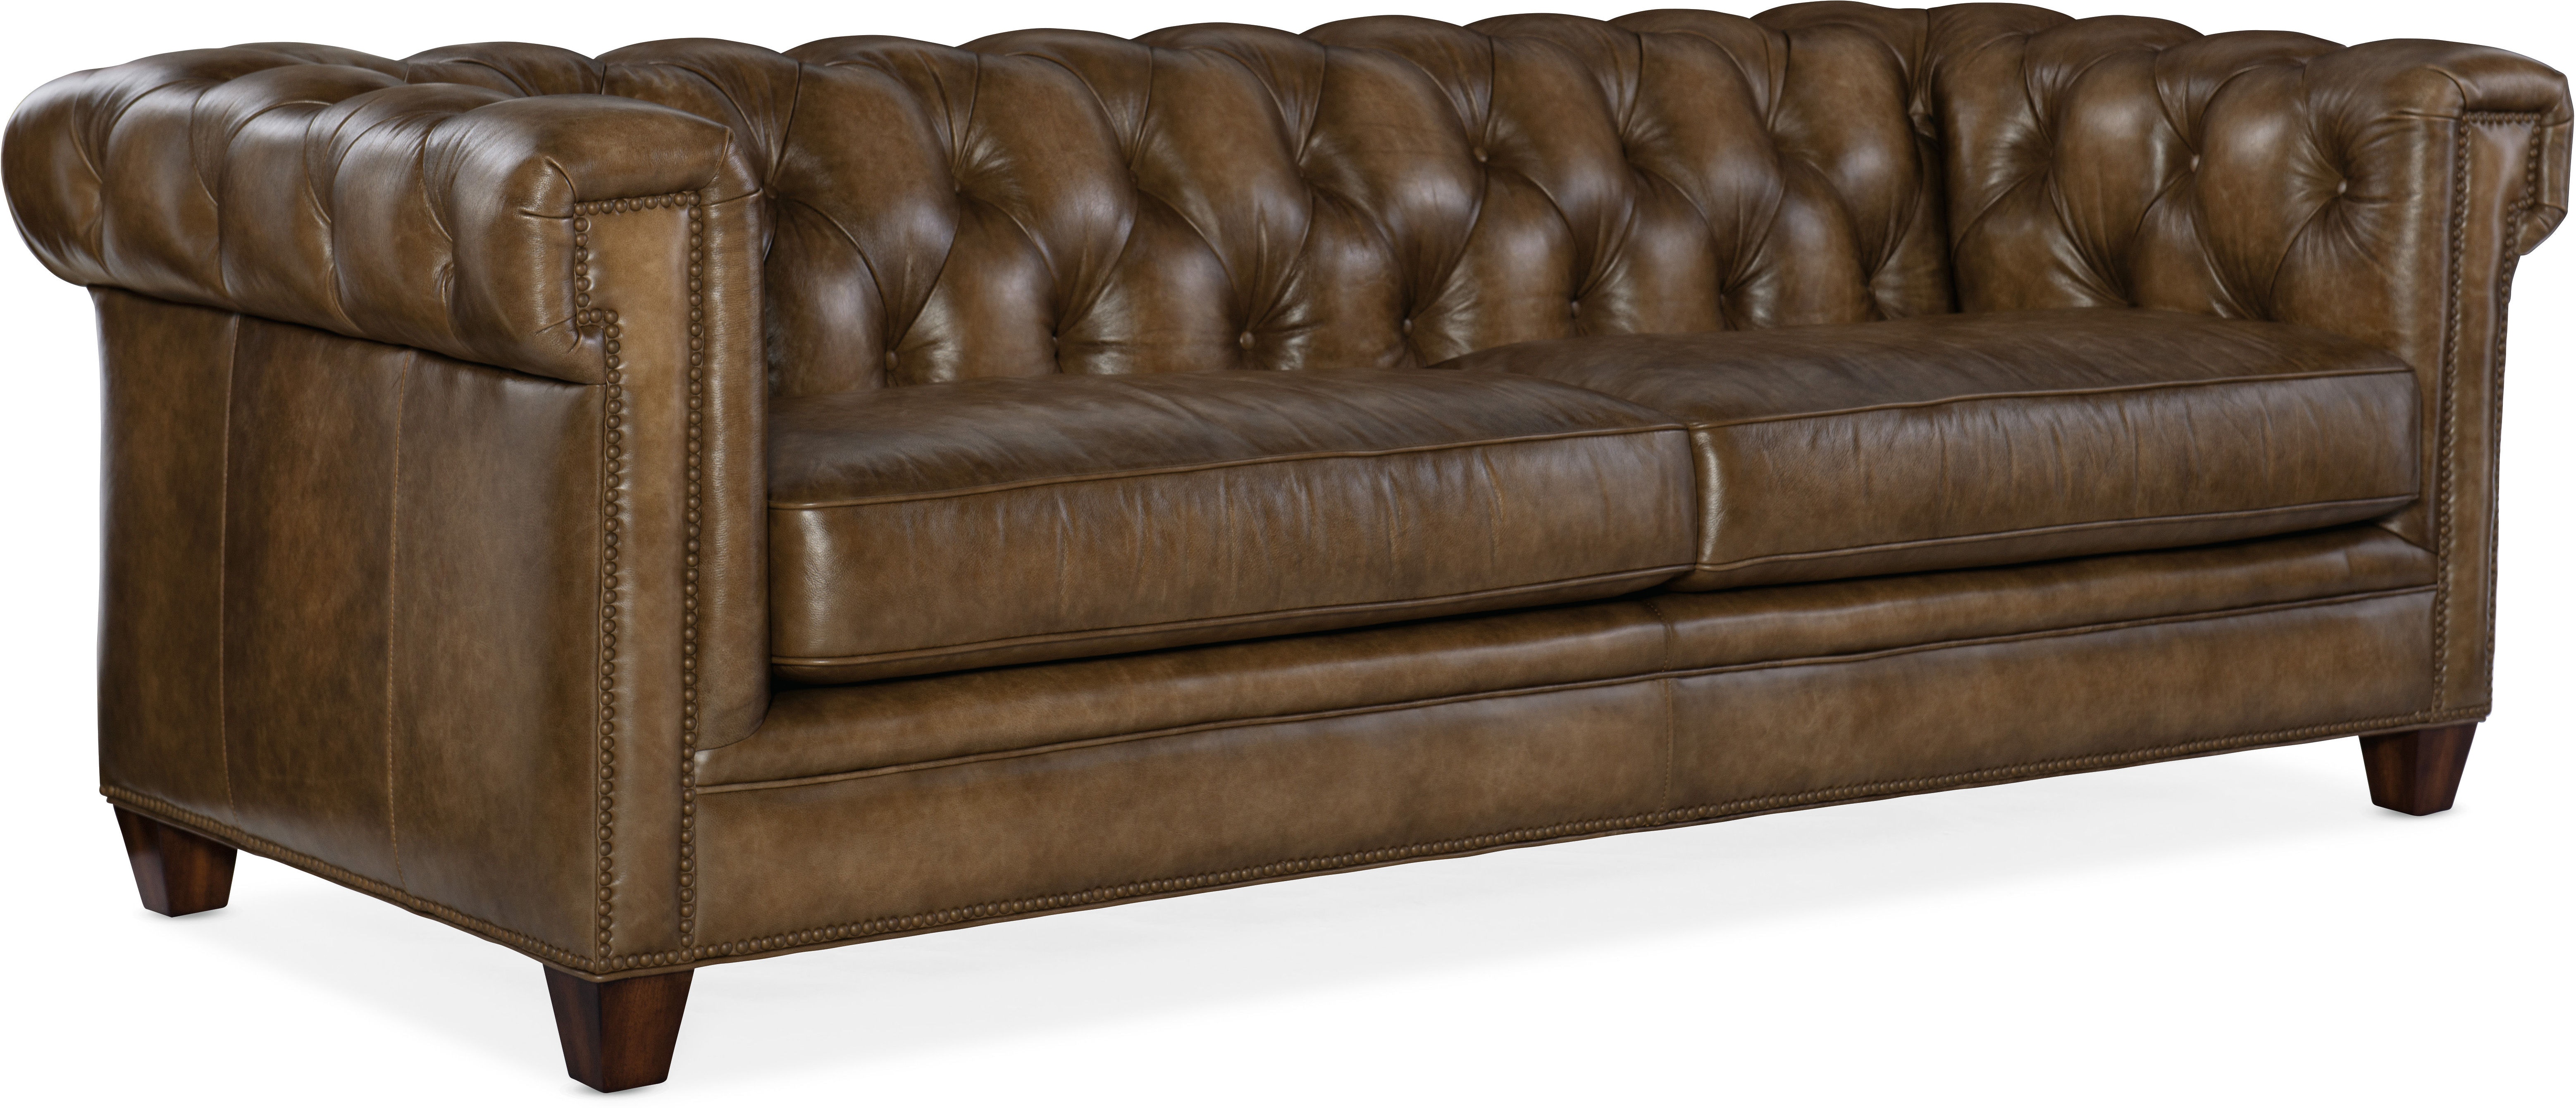 trellis leather sofa by hooker furniture